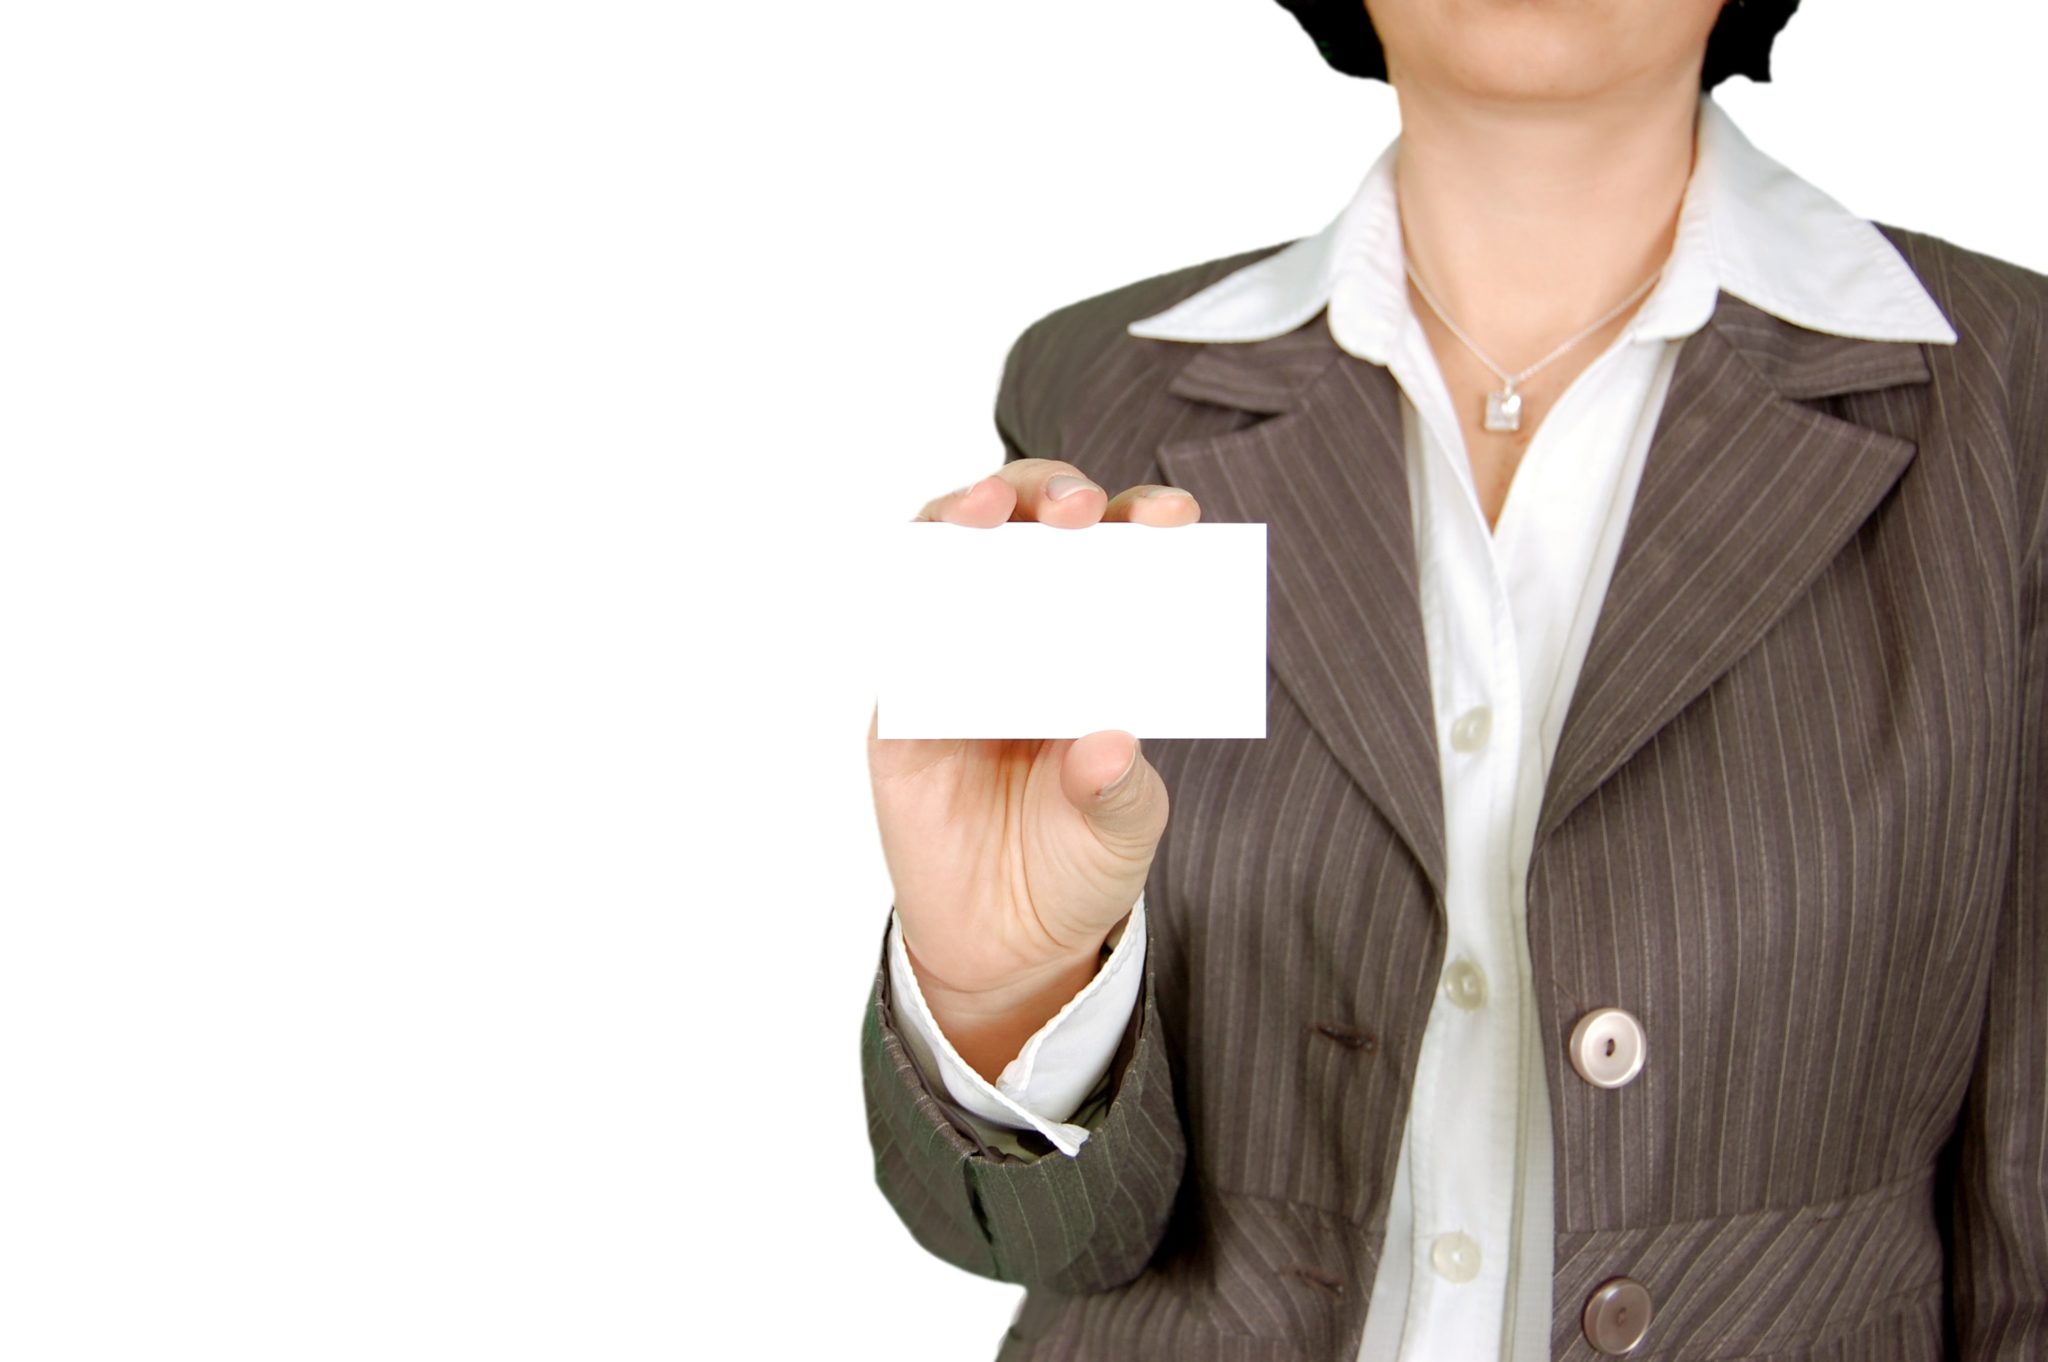 Are your business cards attracting the right type of attention?